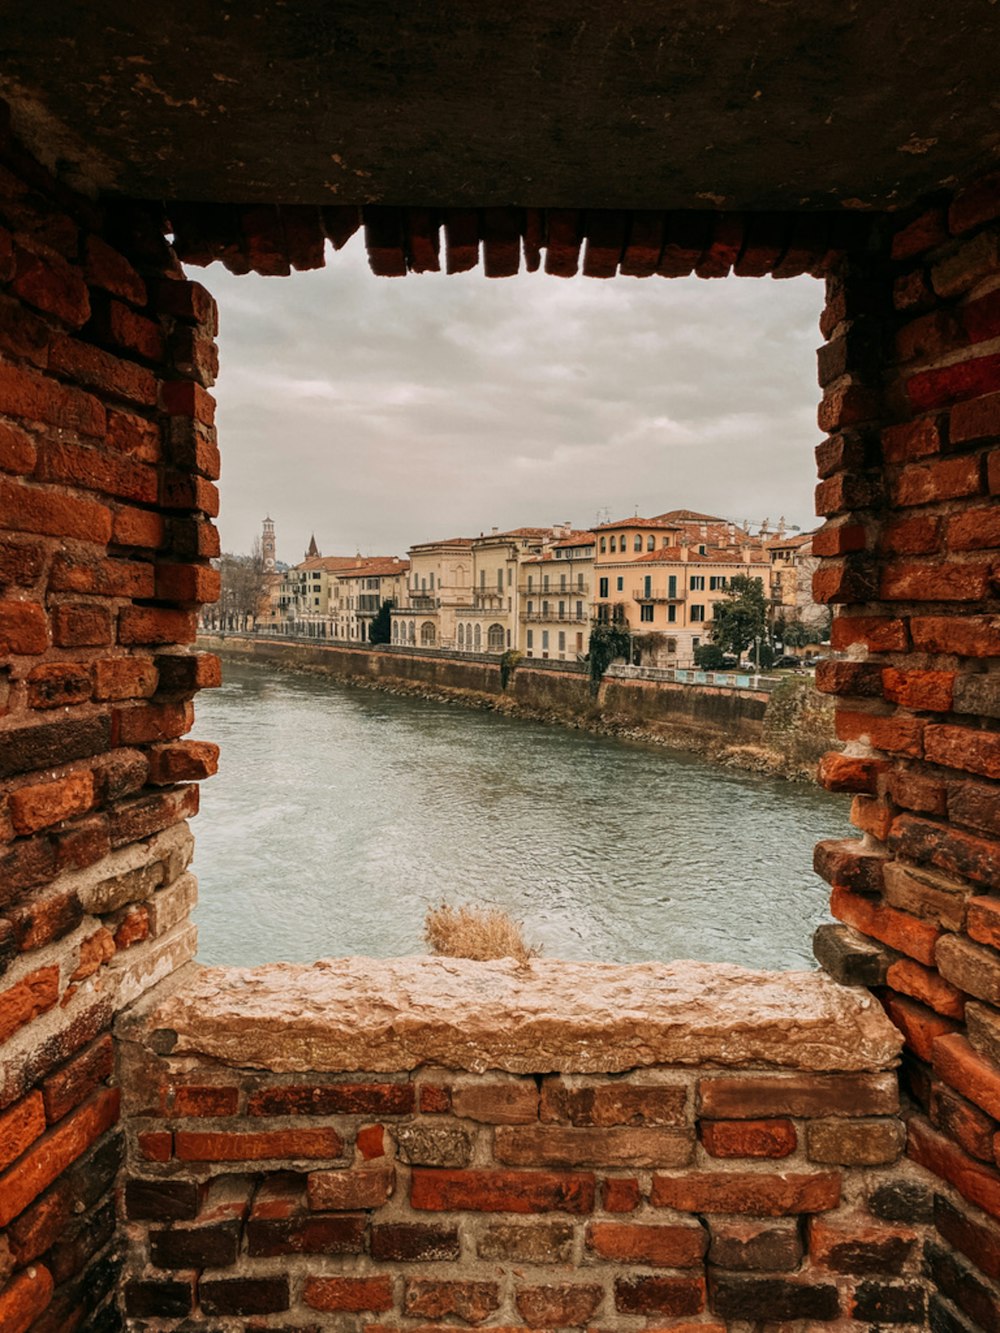 a view of a river through a hole in a brick wall